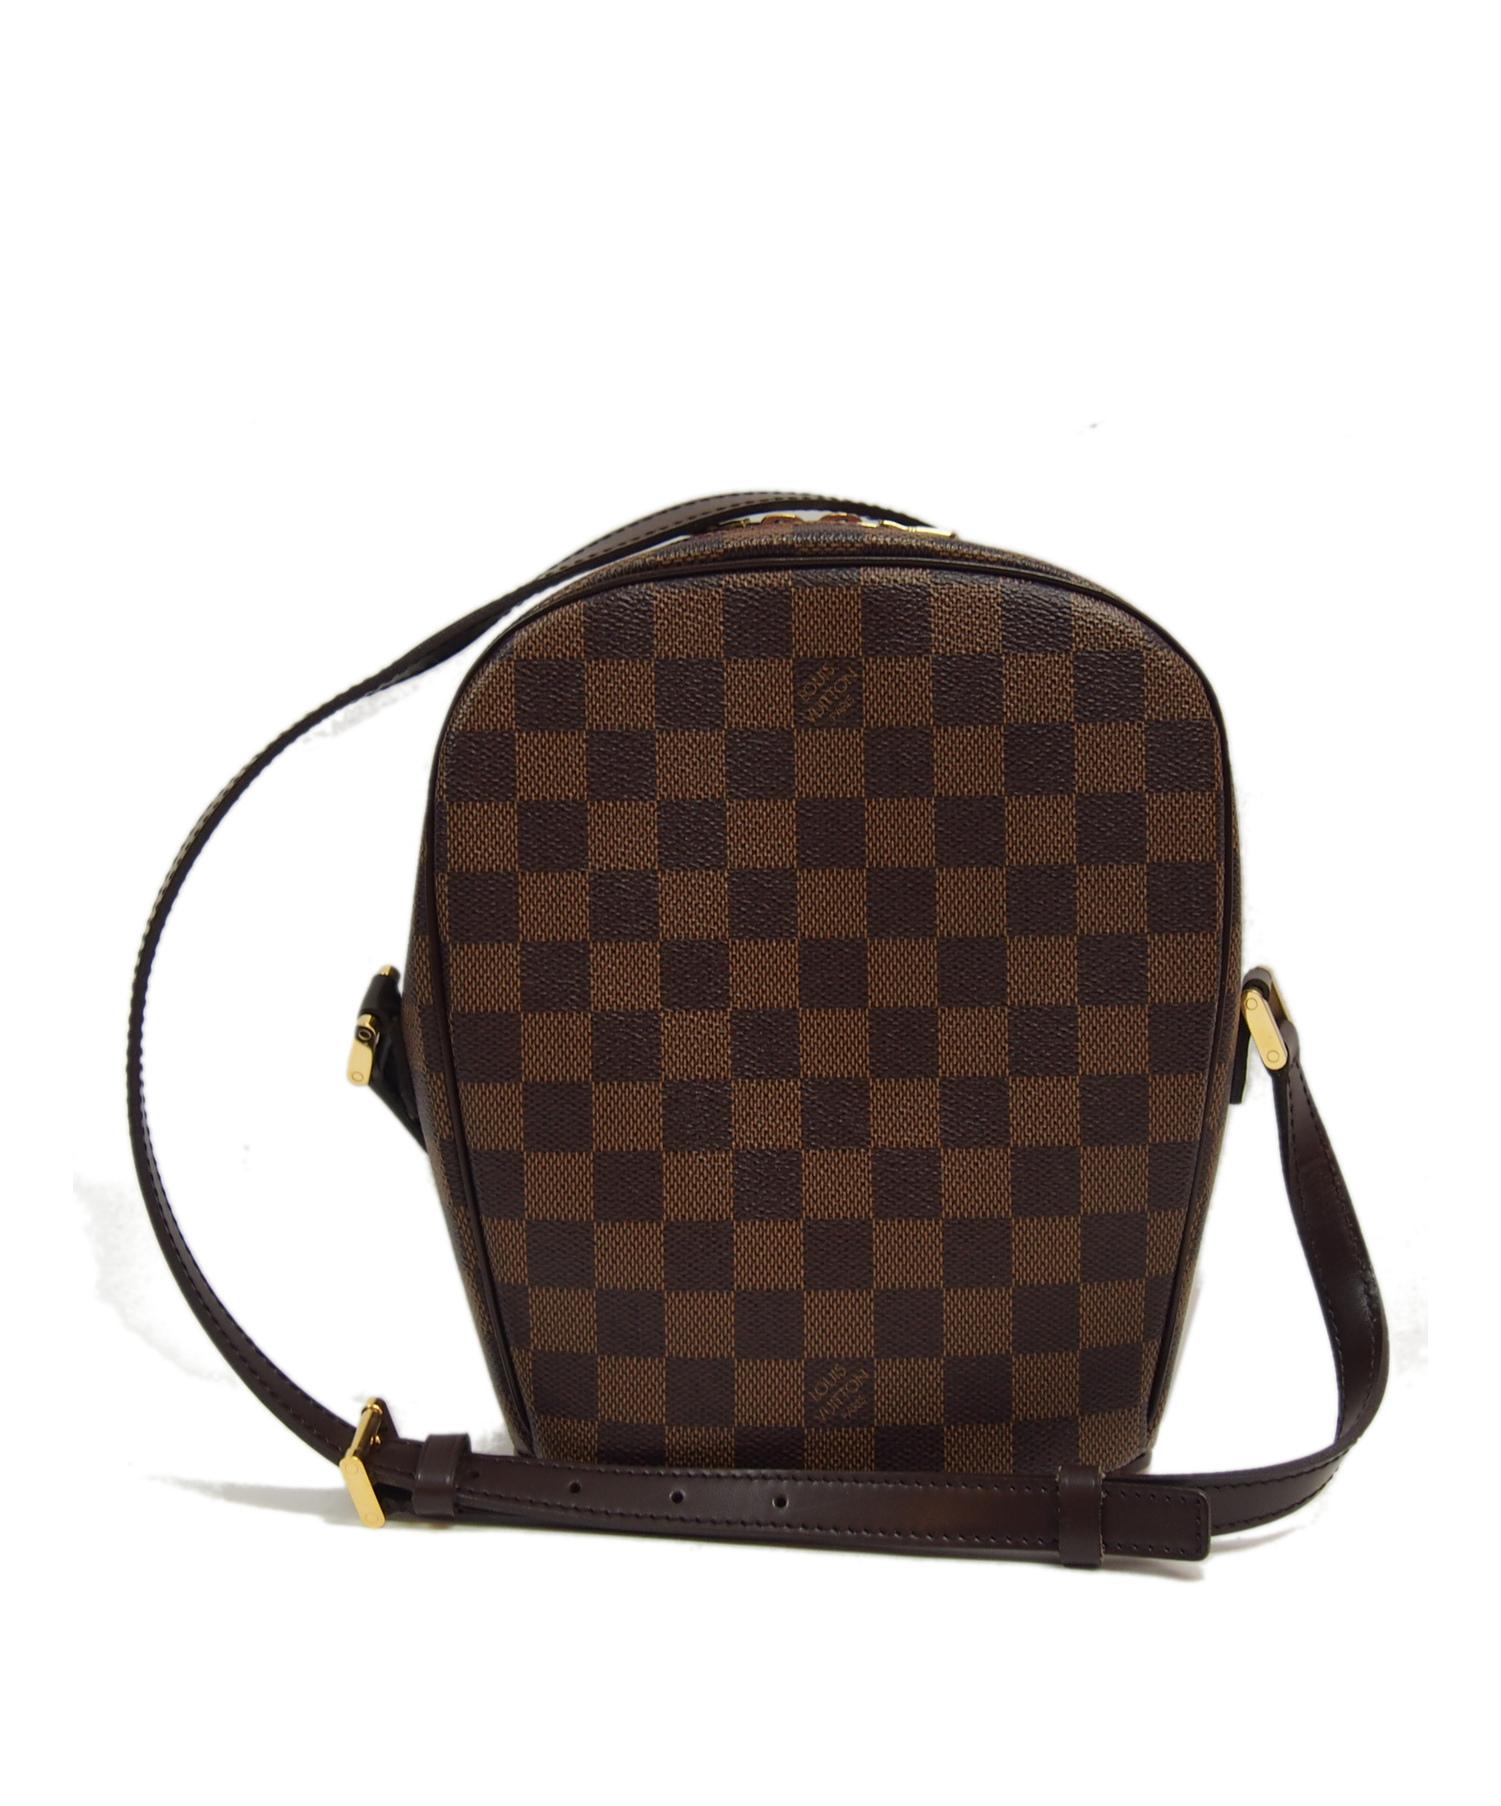 LOUIS VUITTON (ルイヴィトン) イパネマPM サイズ:PM ダミエ N51294 [廃番] VI0065 イパネマ